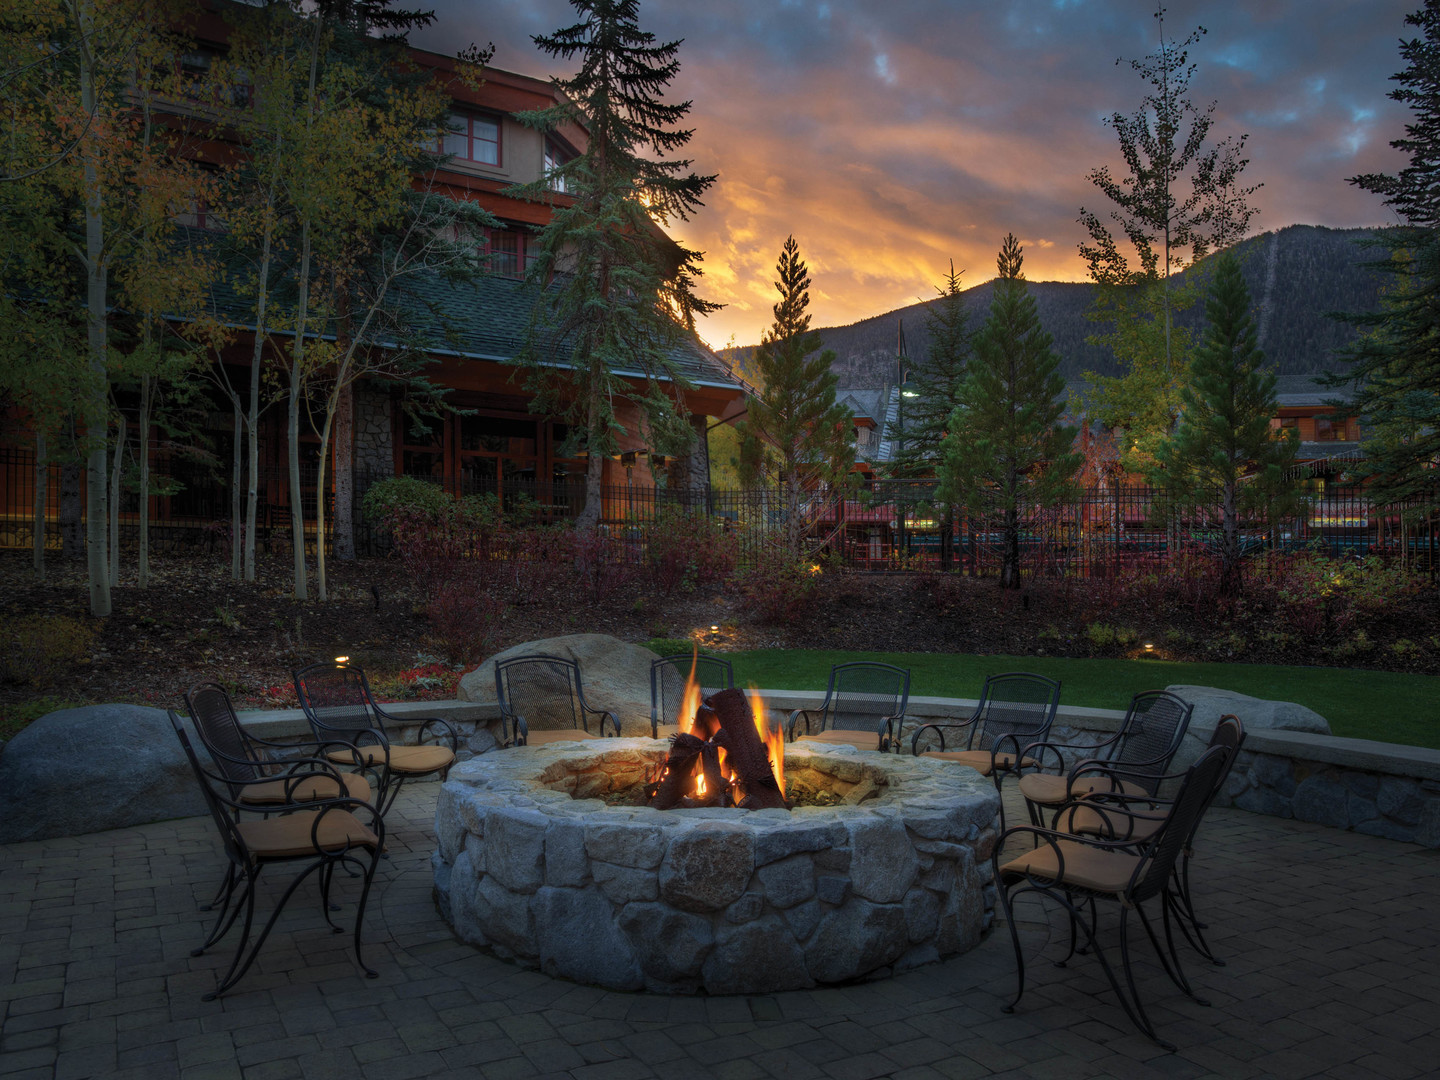 Marriott's Grand Residence Club<span class='trademark'>®</span> 1, Lake Tahoe Fire Pit. Marriott's Grand Residence Club<span class='trademark'>®</span> 1, Lake Tahoe is located in South Lake Tahoe, California United States.